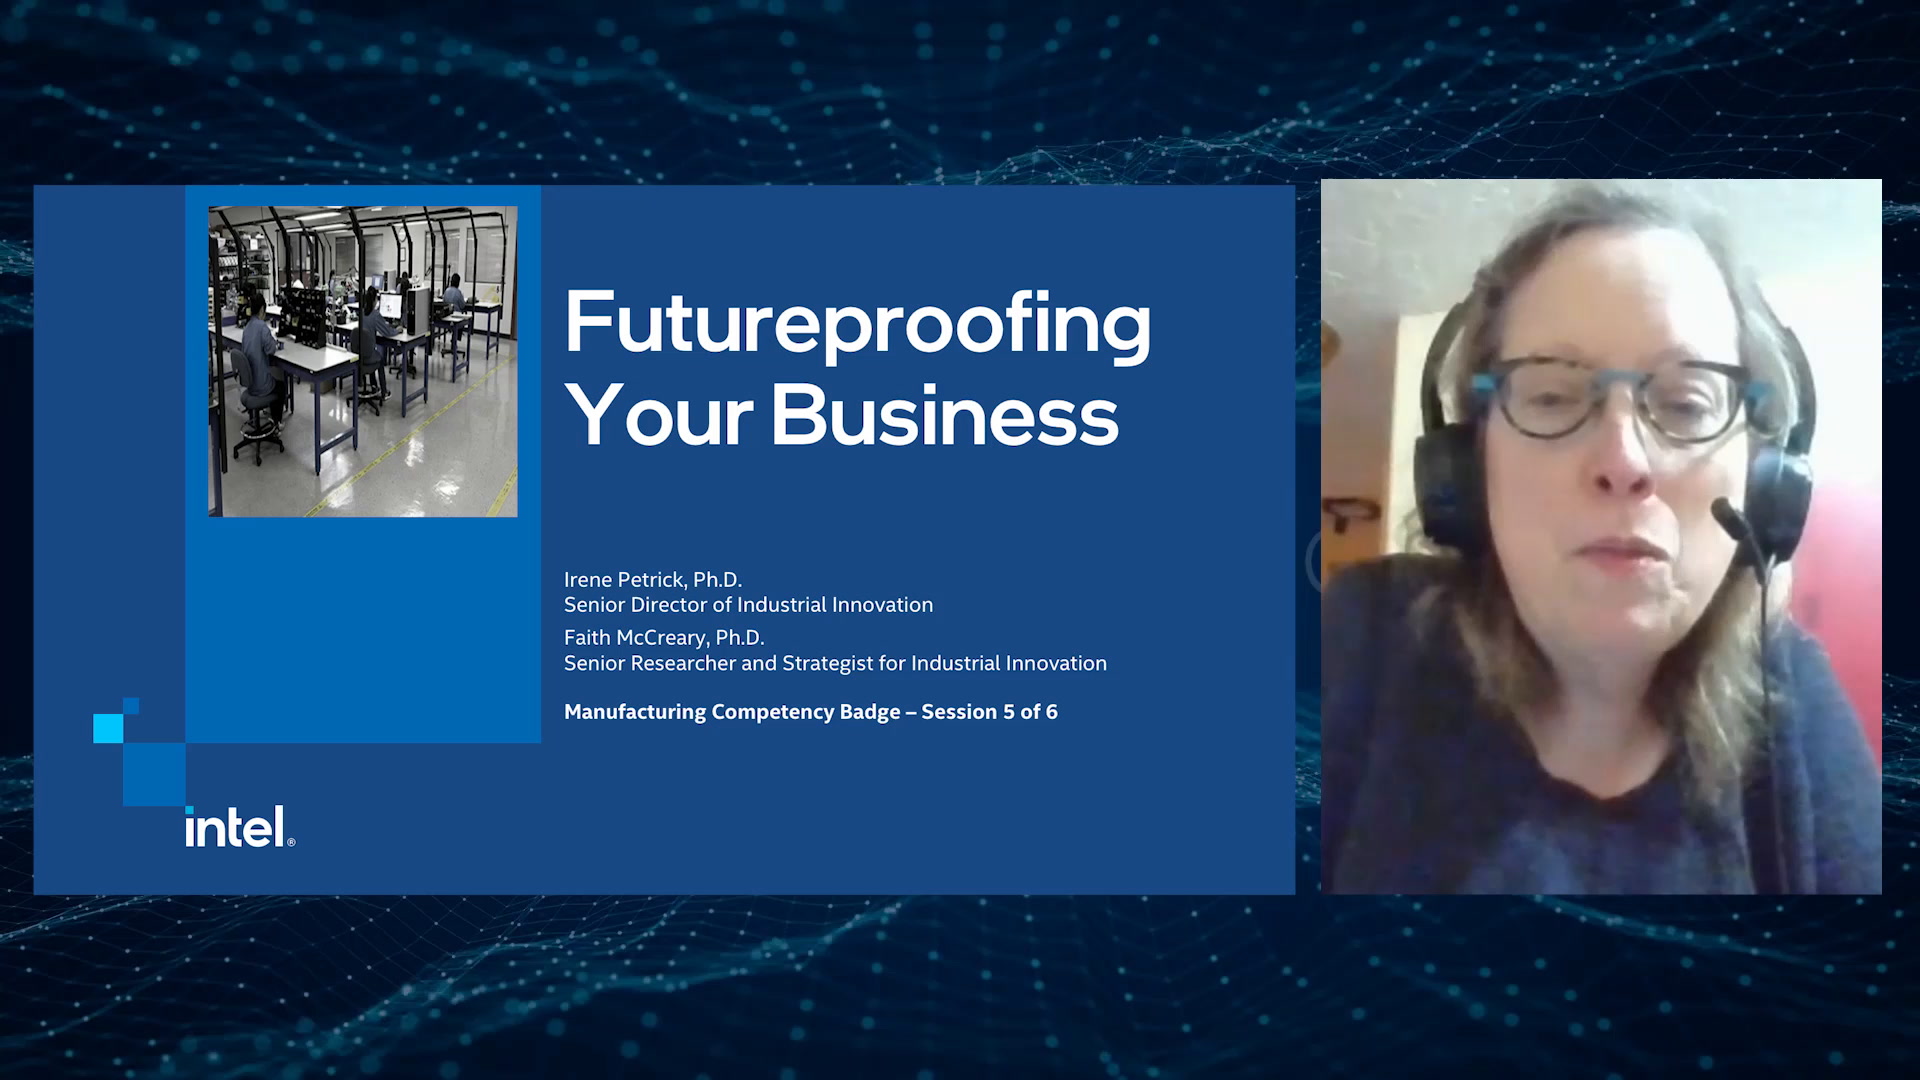 Futureproofing Your Business